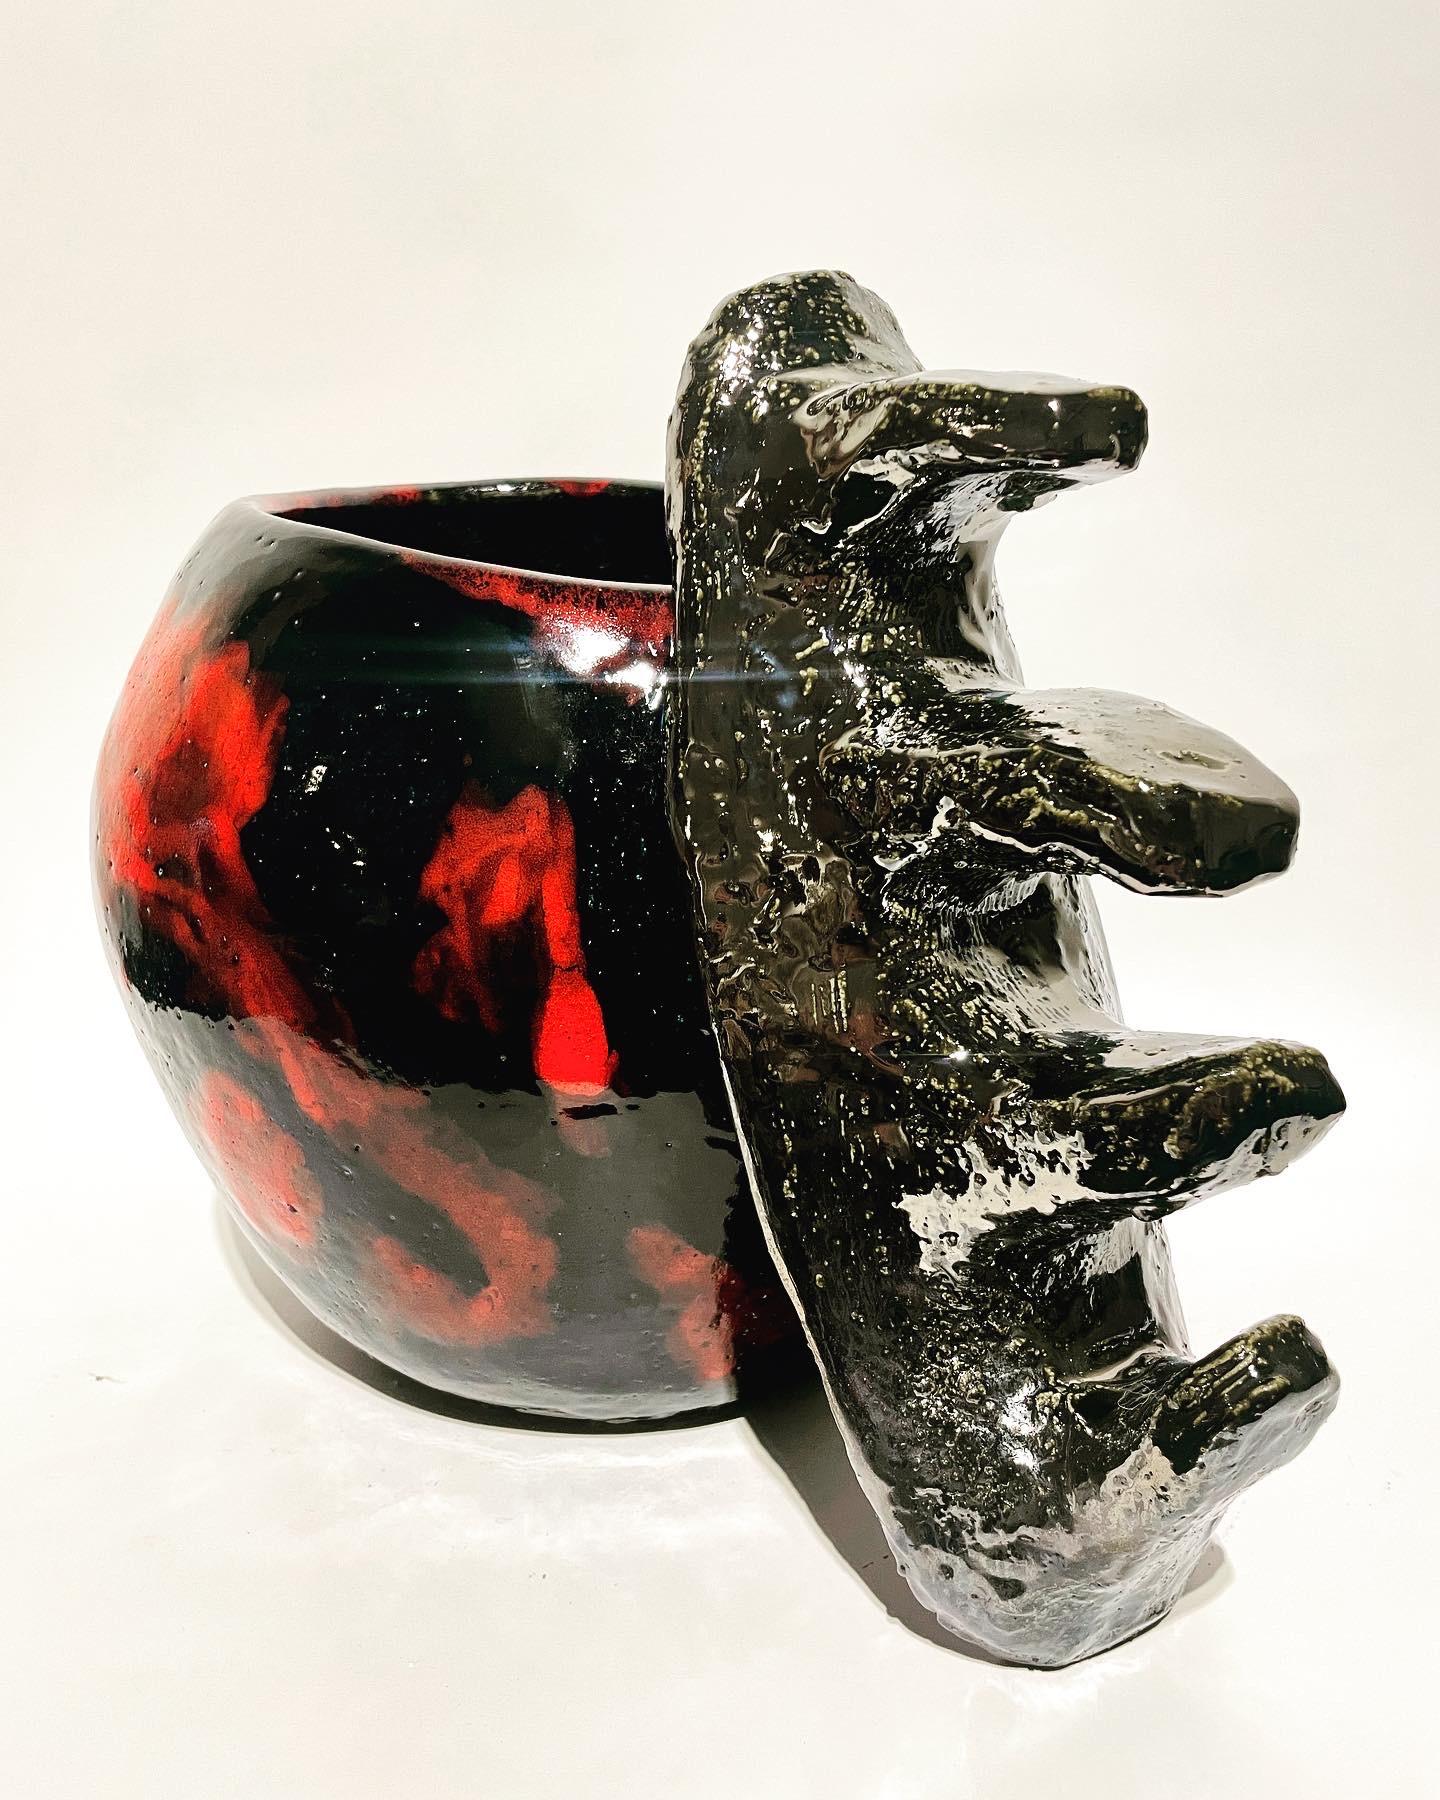 The Detached Knuckler Flower Vase, in diffused China Red / Raven and Broken Silver, for your favorite flower/plant or as a vase/objet d'art or sculpture. Made sustainably of 100% recycled stoneware and 100% lead free glaze, hand built by the artist